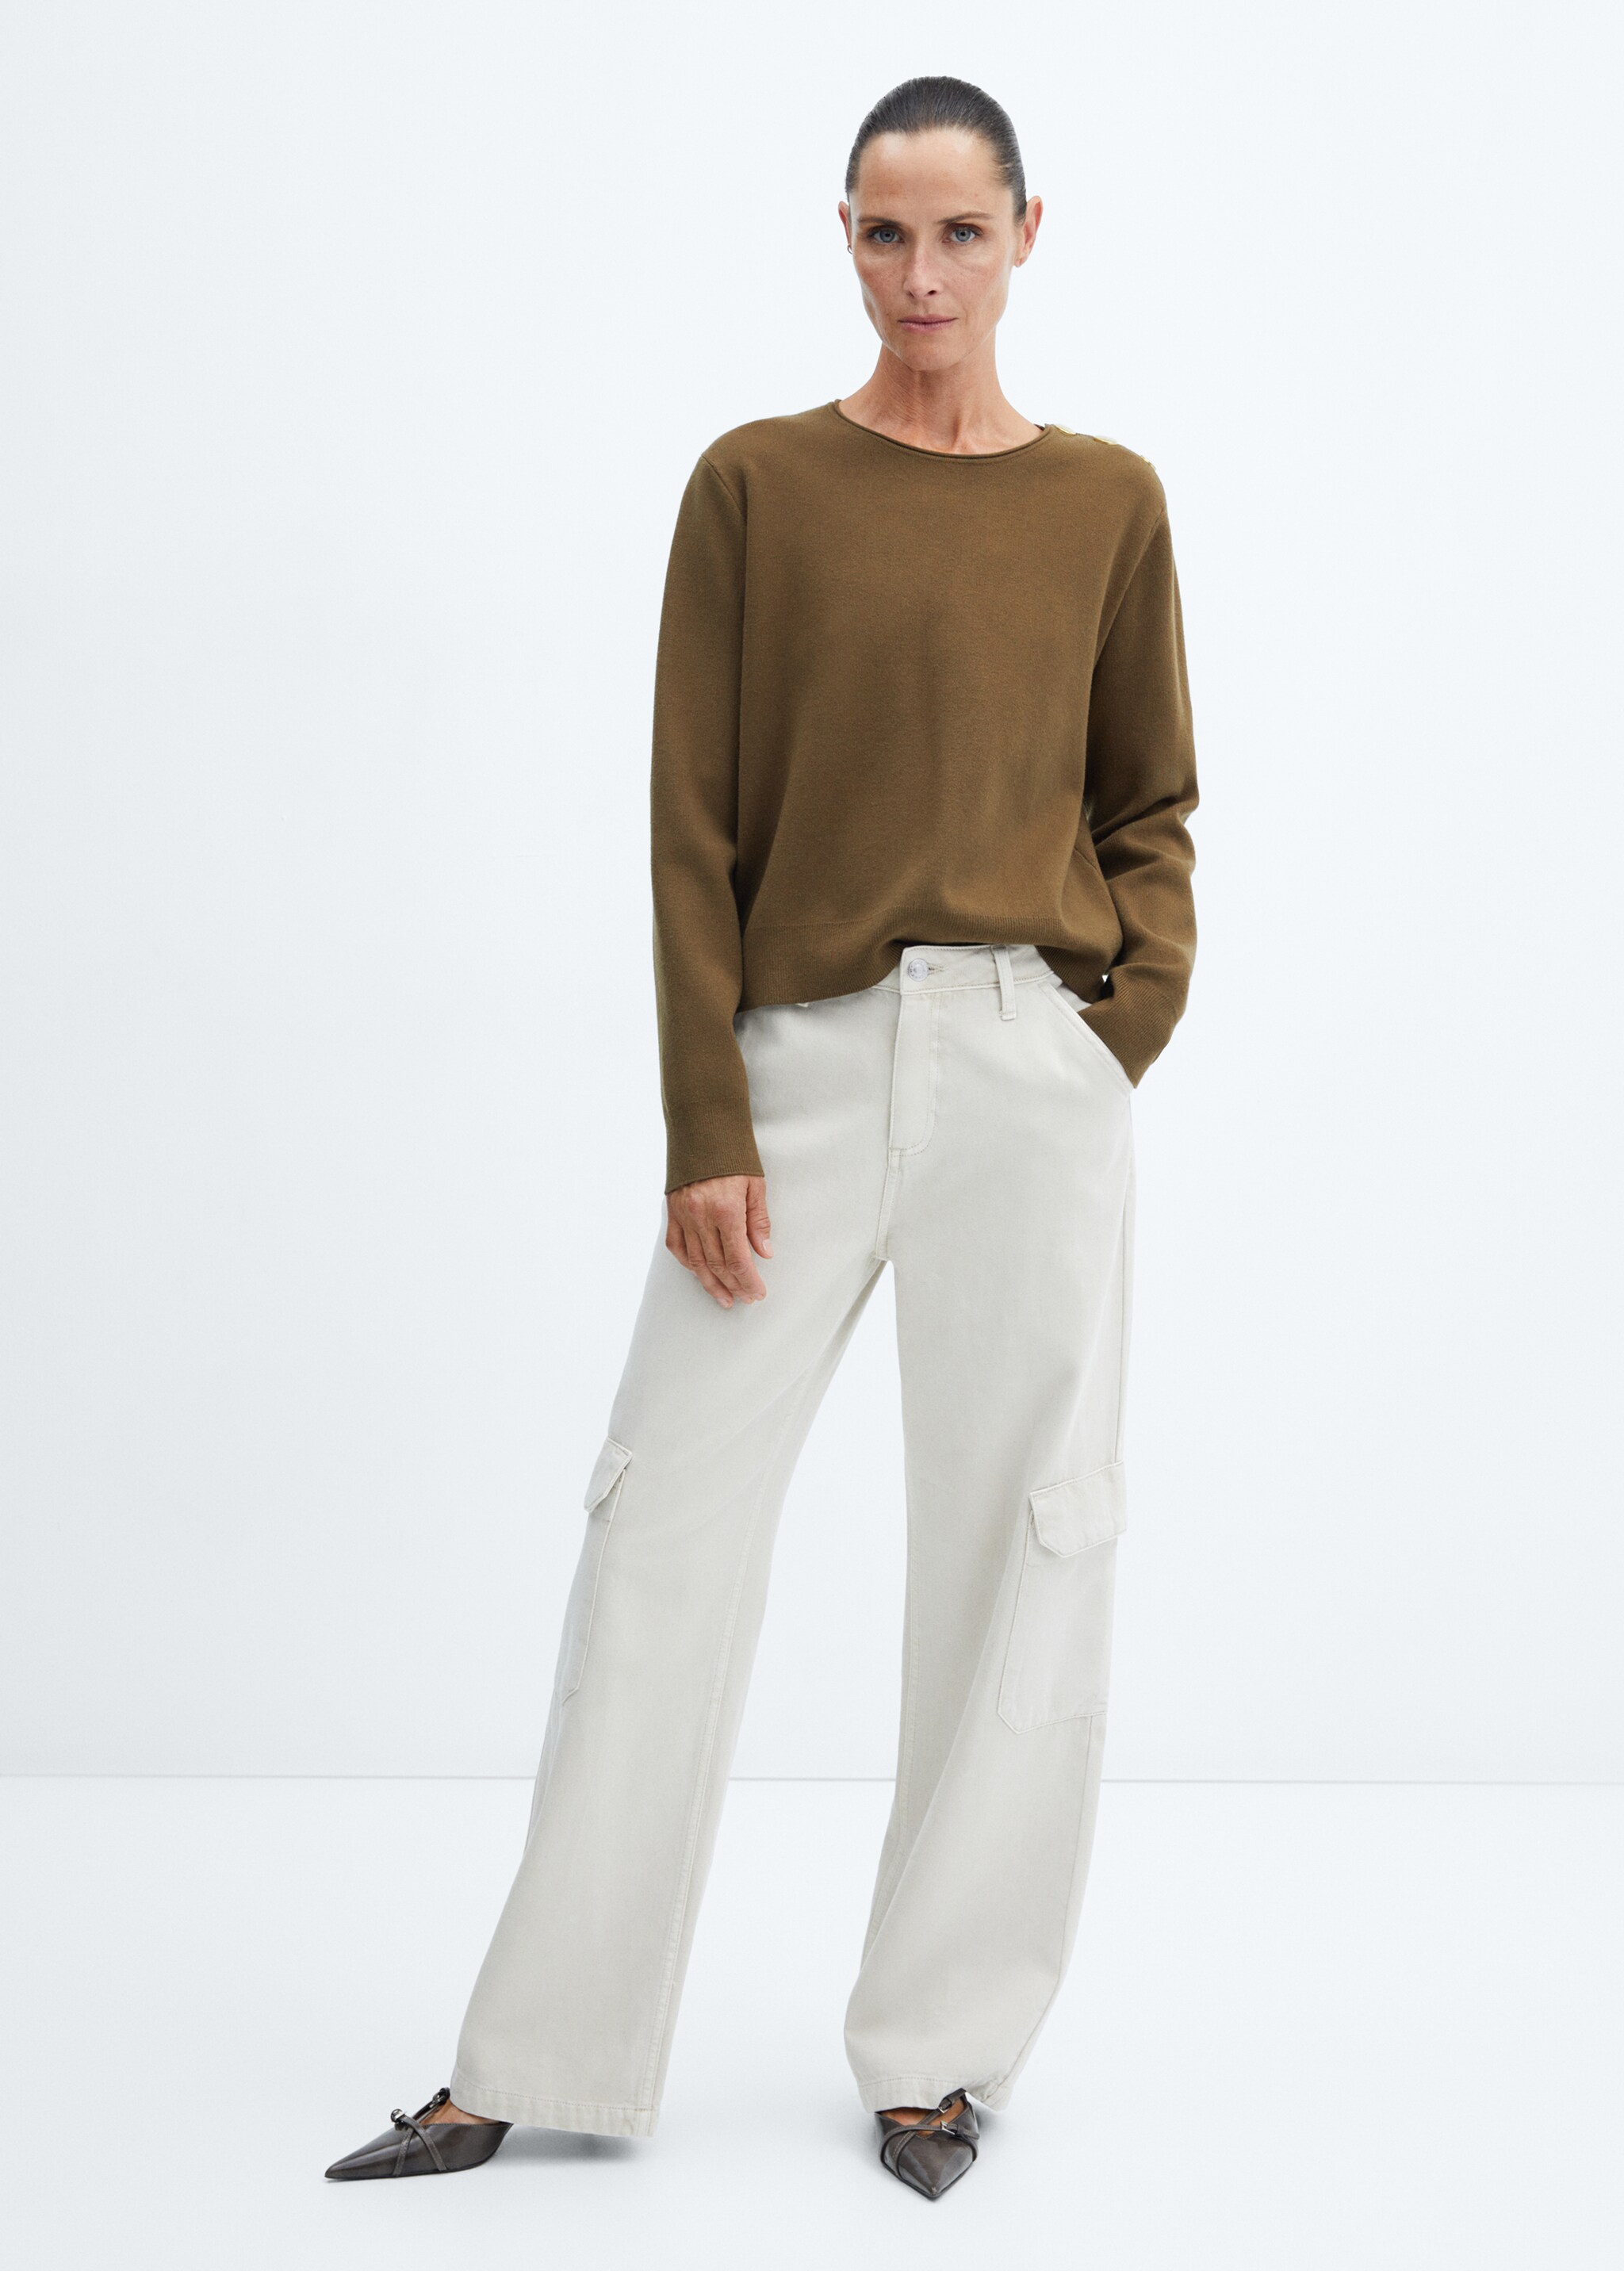 Sweater with shoulder buttons  - General plane